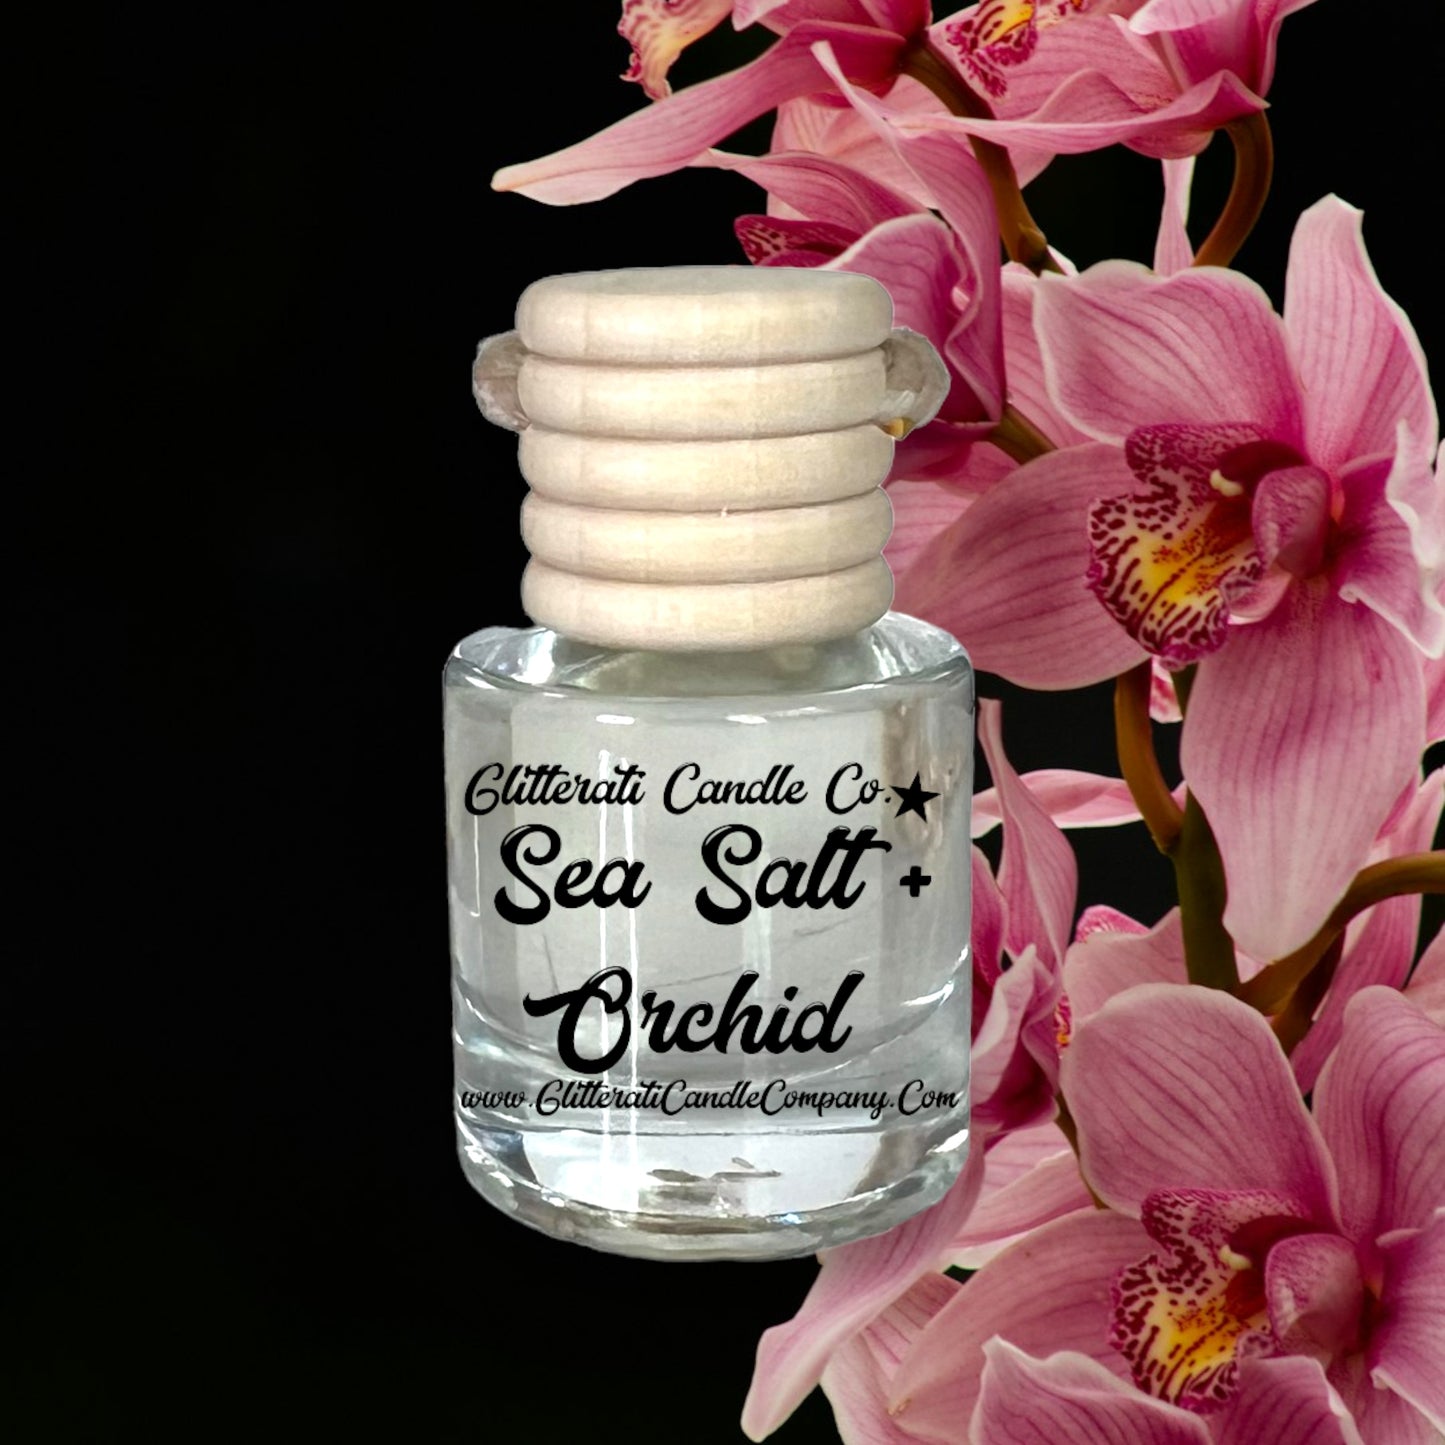 Sea Salt and Orchid Scented Hanging Car Oil Diffuser Freshener